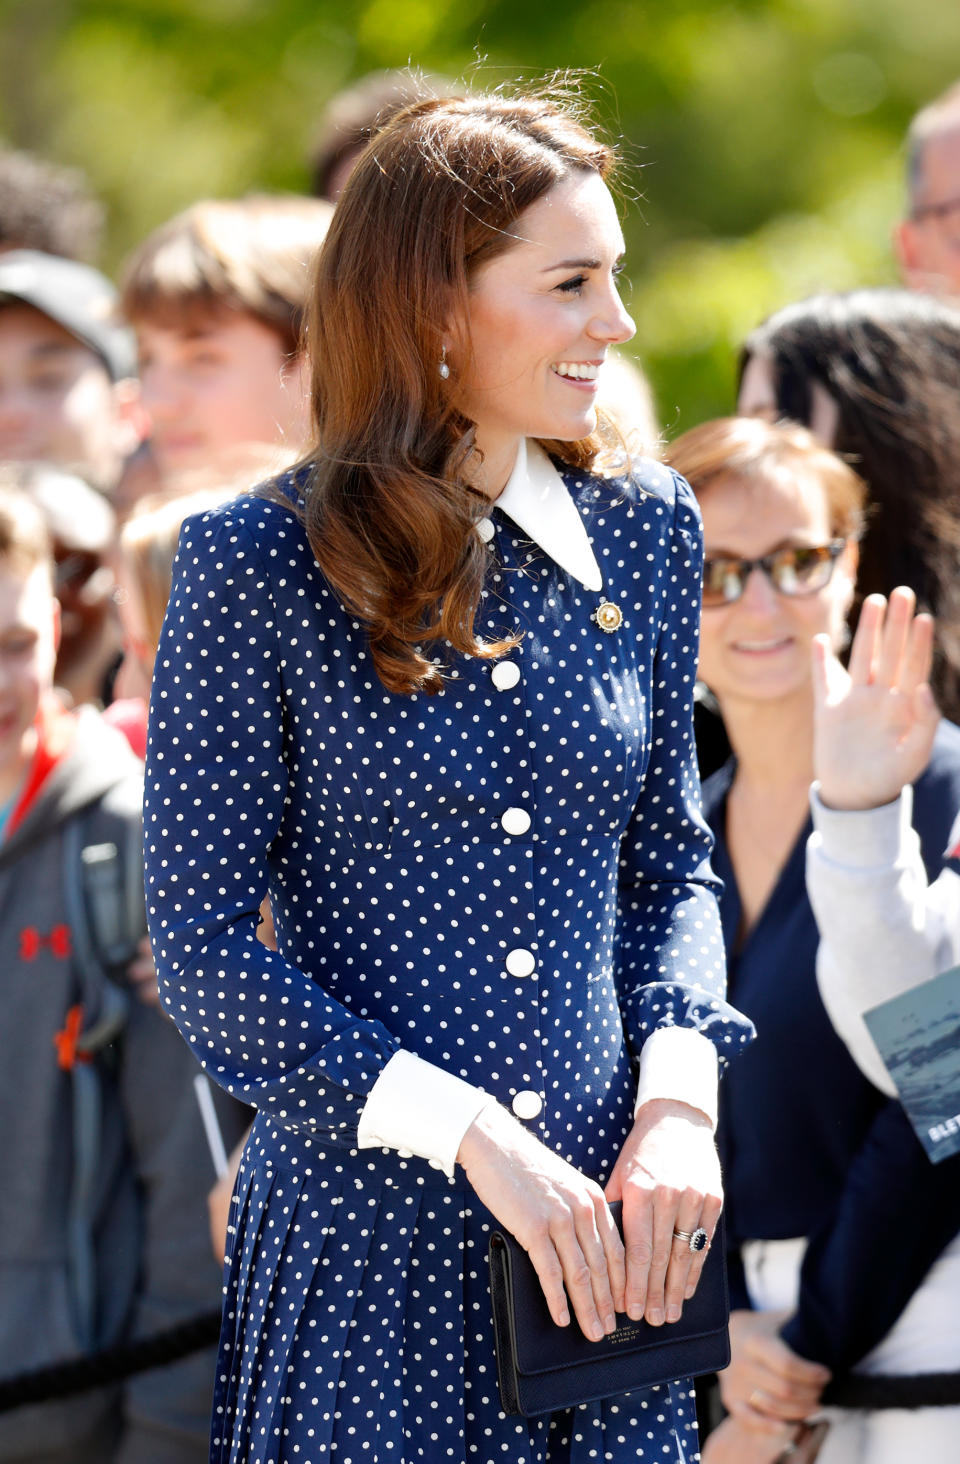 In May, Kate Middleton wore a stylish blue-and-white polka dot dress to Bletchley Park in England. (Photo: Getty Images)